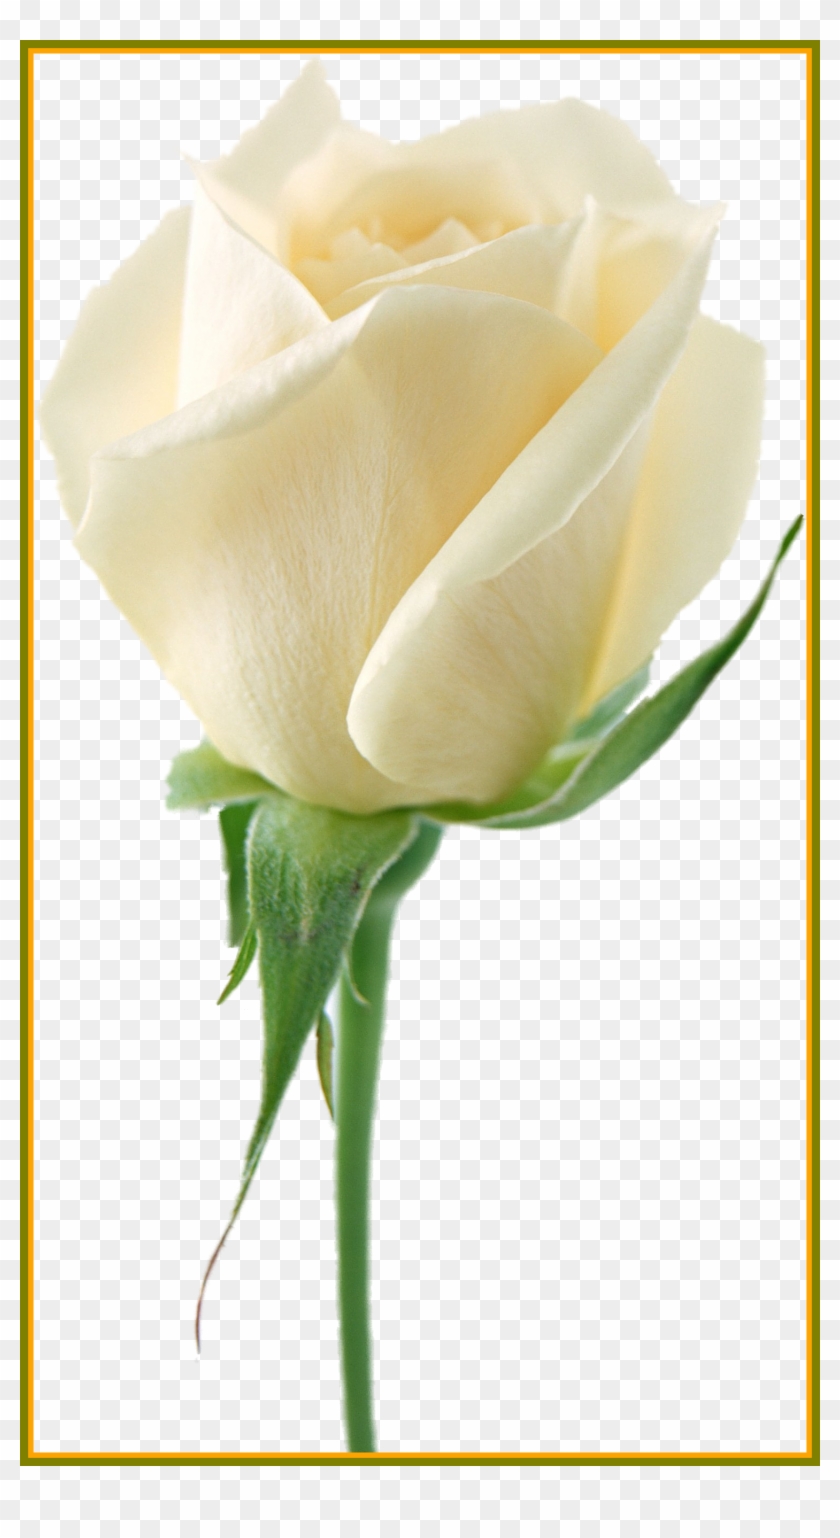 Amazing White Roses Png My Favorites Picture Of Wedding - White Roses Transparent Background #1228940